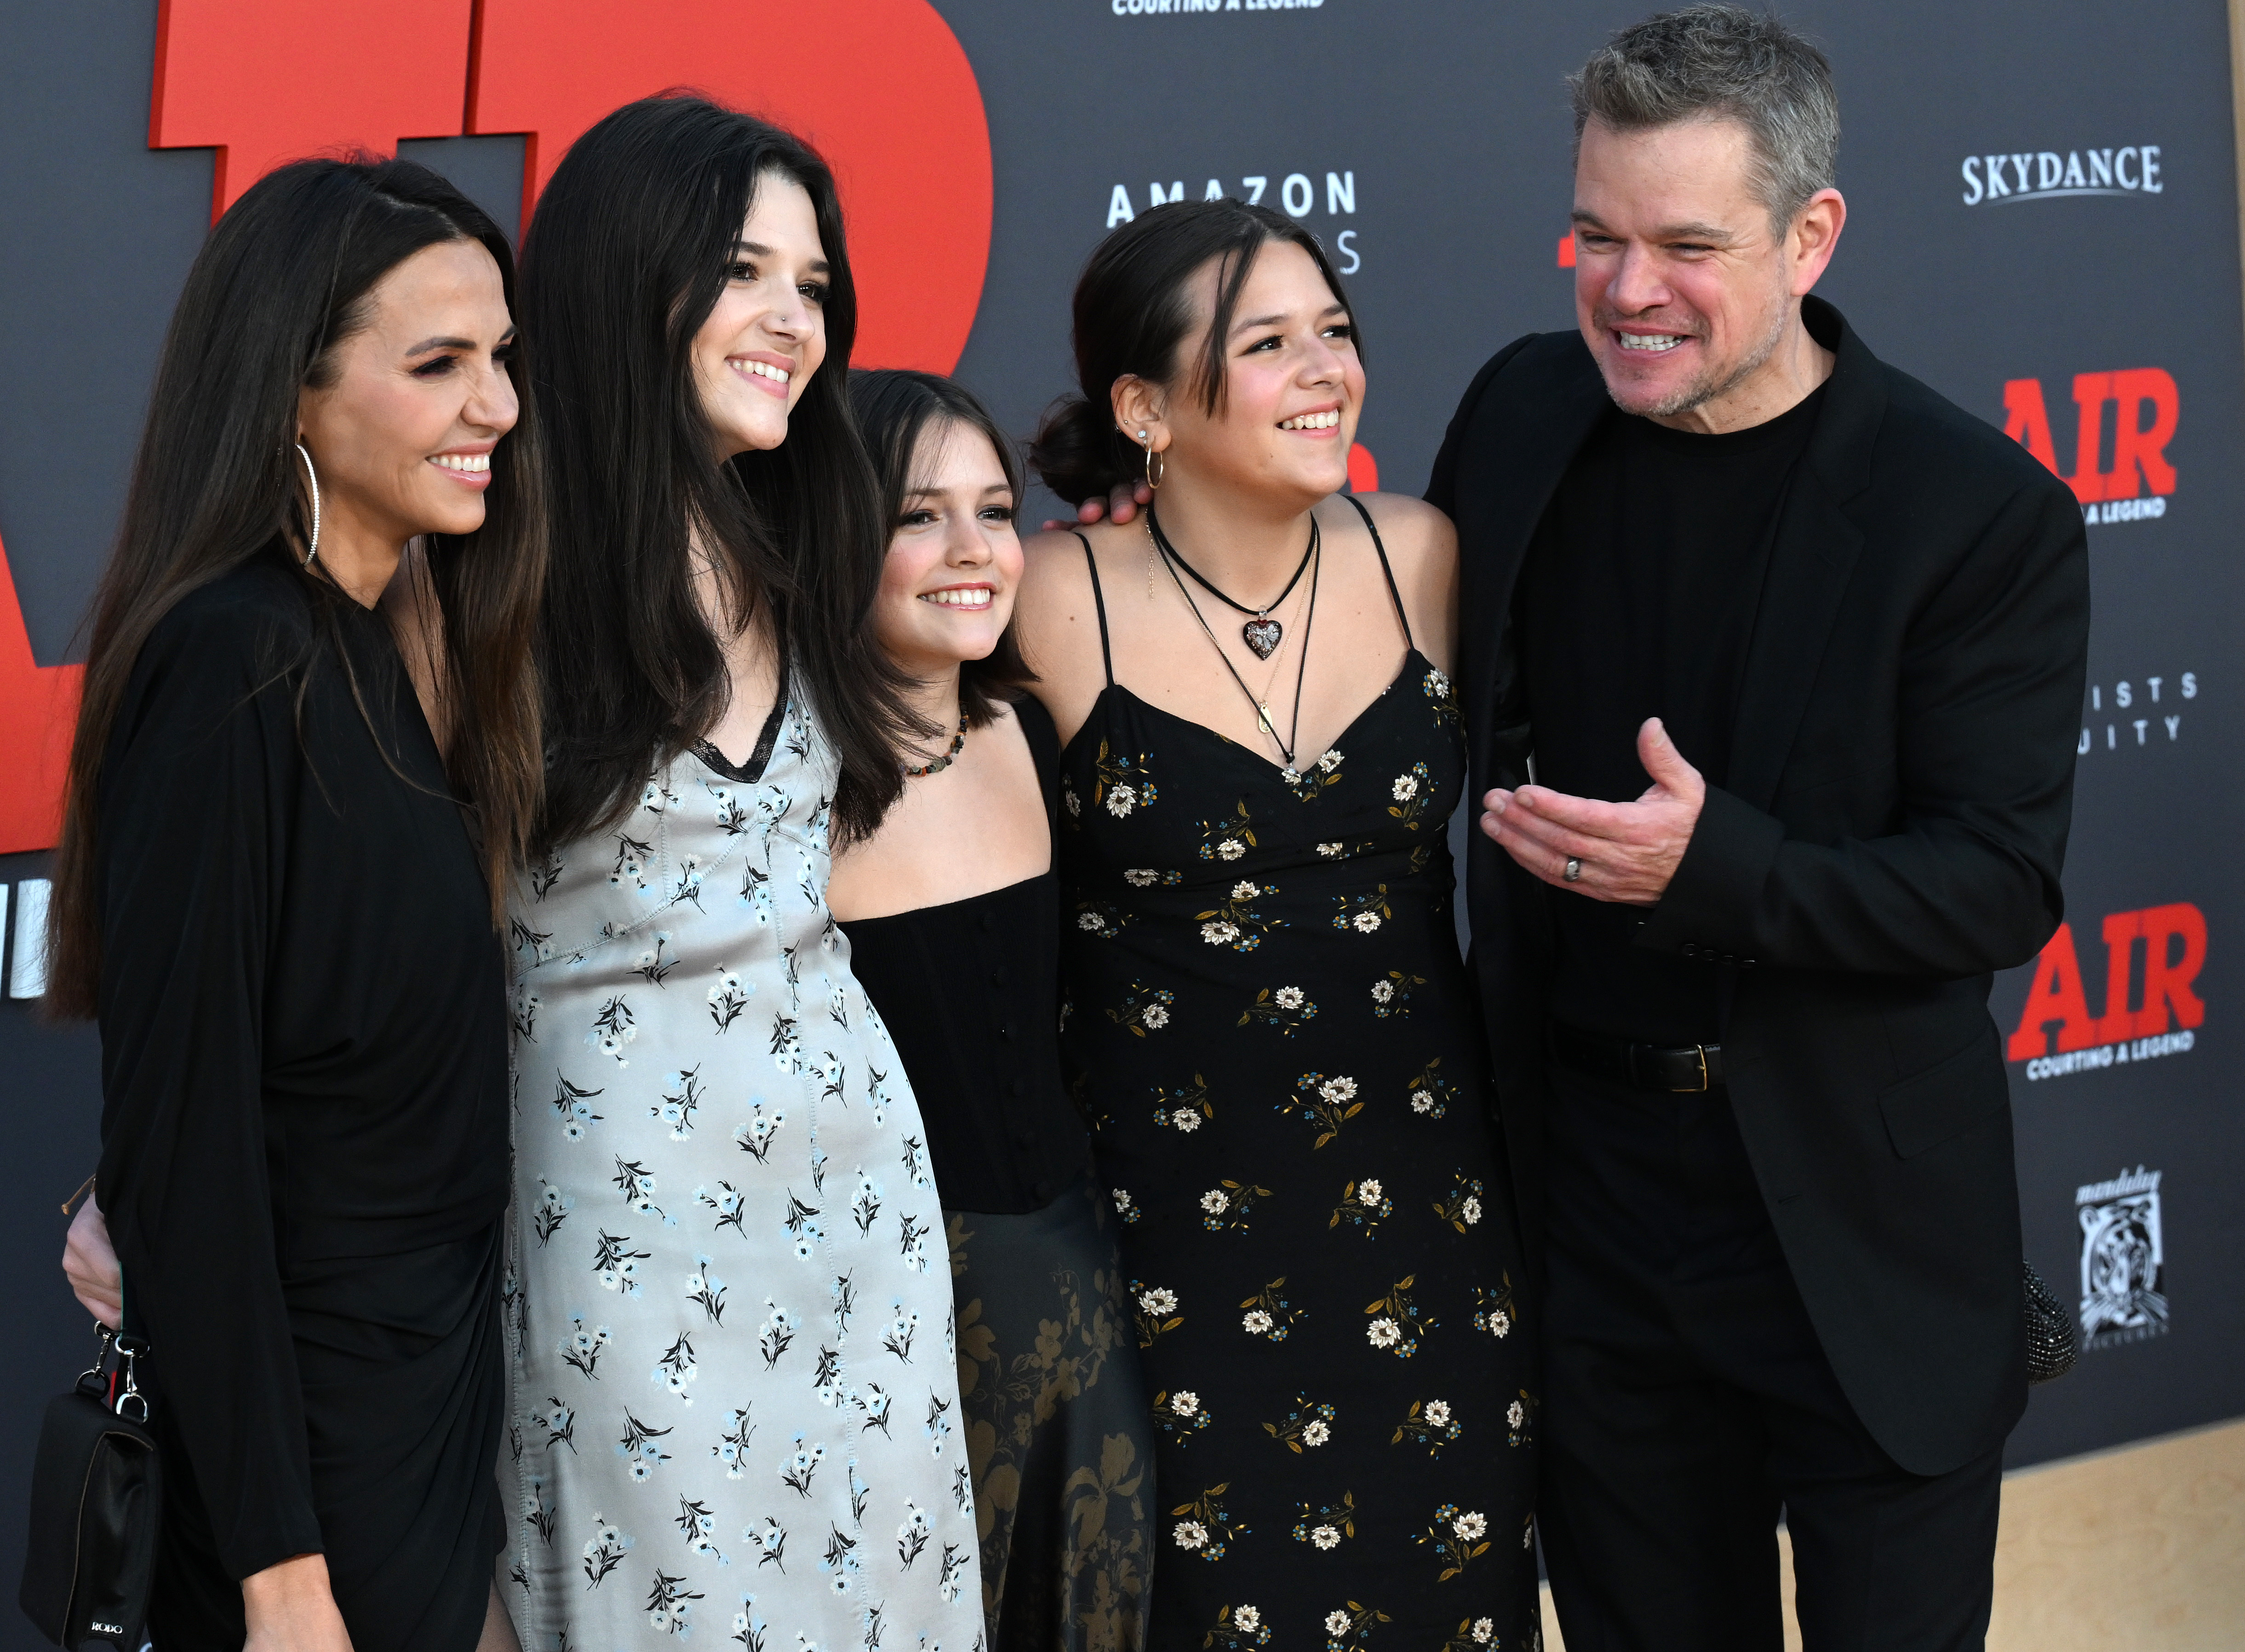 Matt Damon and family arrive for Amazon Studios' world premiere of "Air" at Regency Village Theatre on March 27, 2023 in Los Angeles, California. | Source: Getty Images